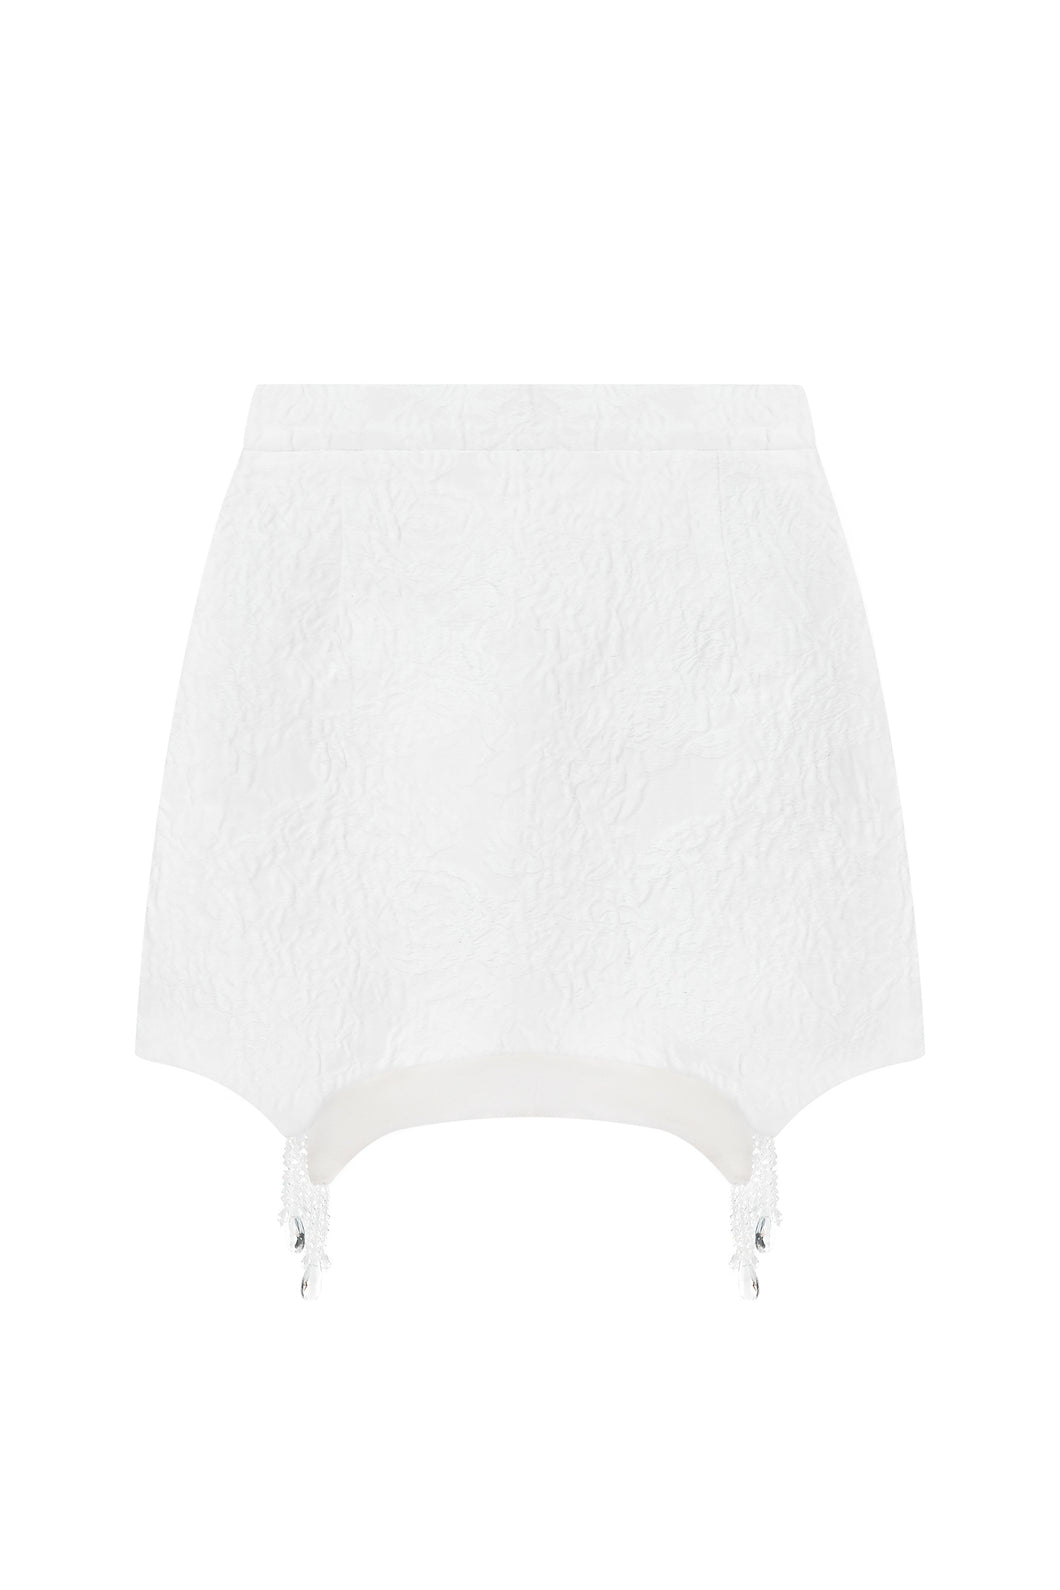 JACQUARD WHITE SKIRT WITH A DROPS DECOR